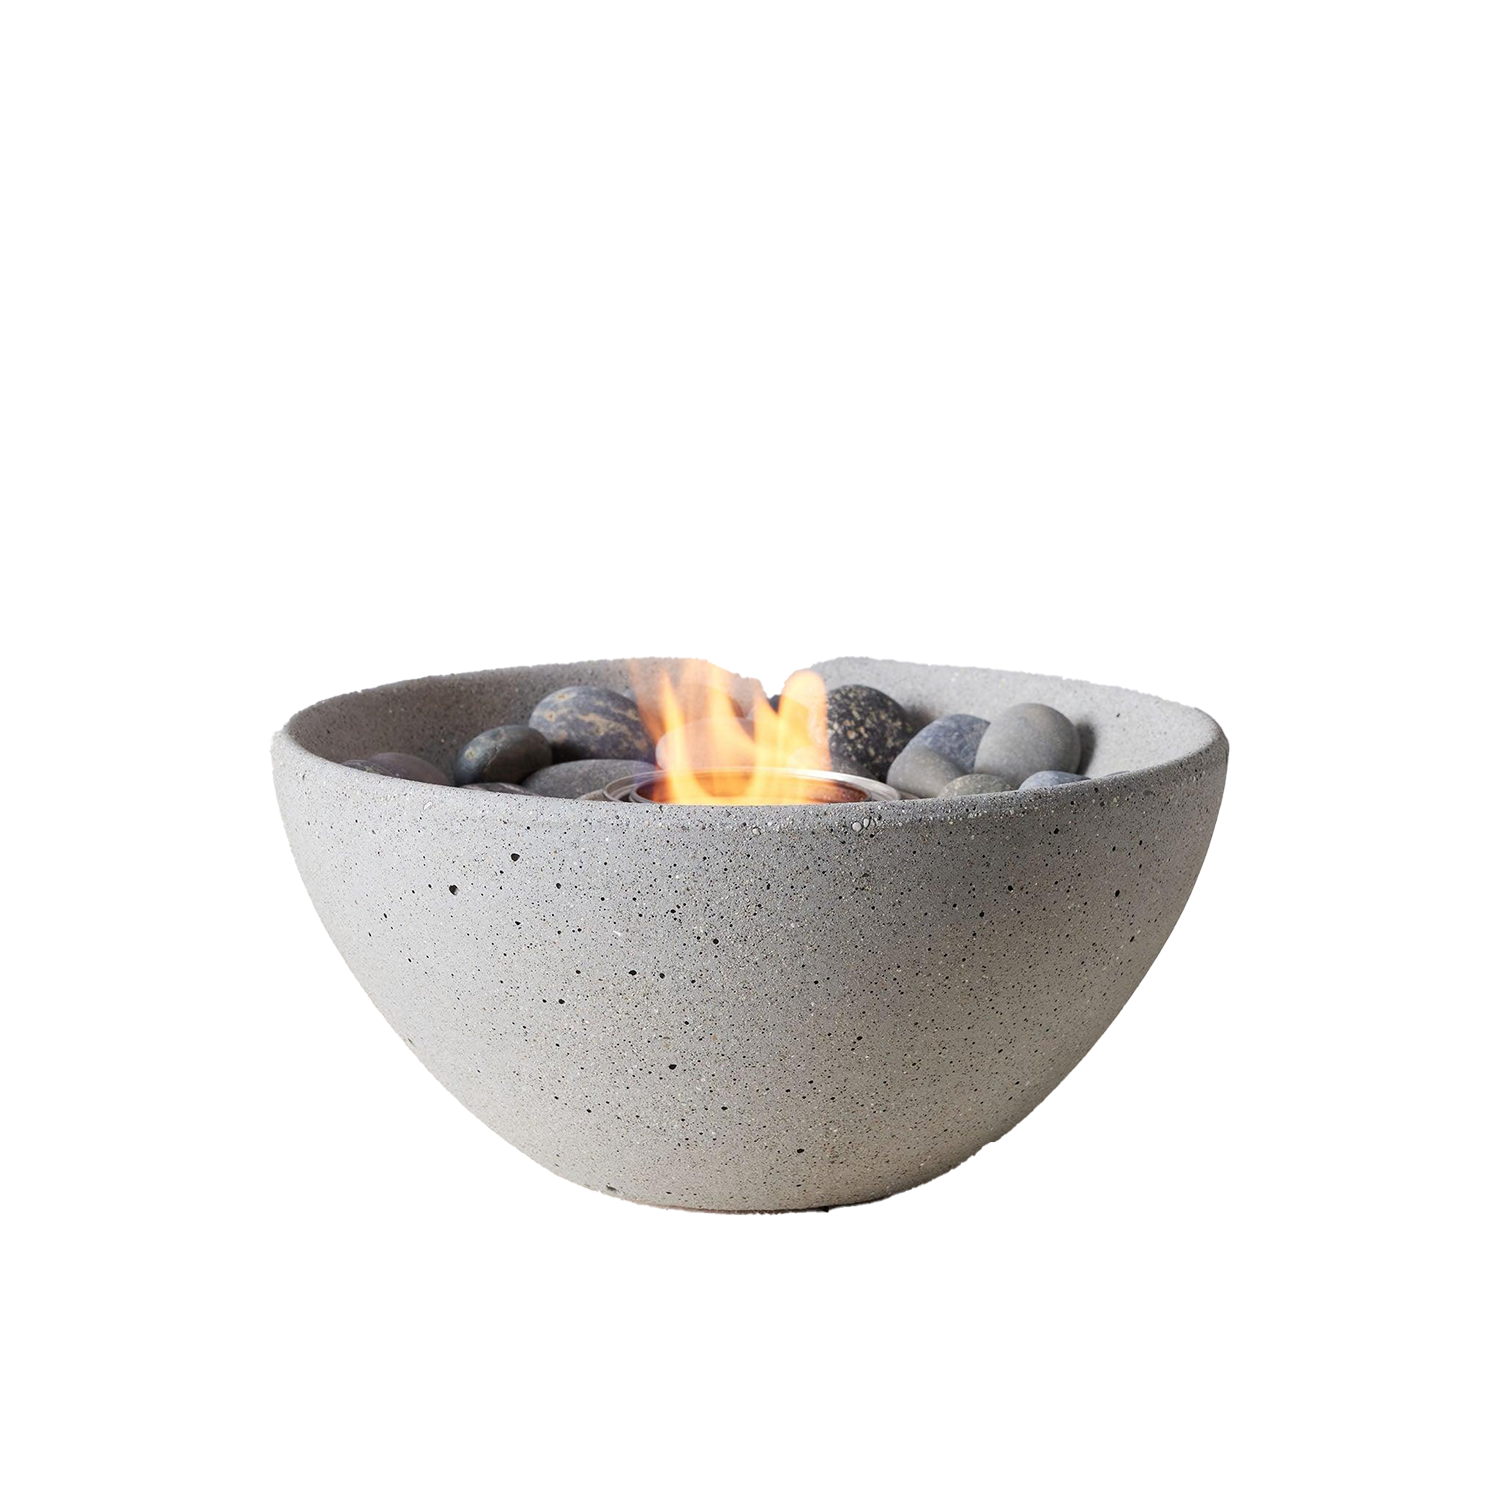 Basin Fire Bowl Table Top